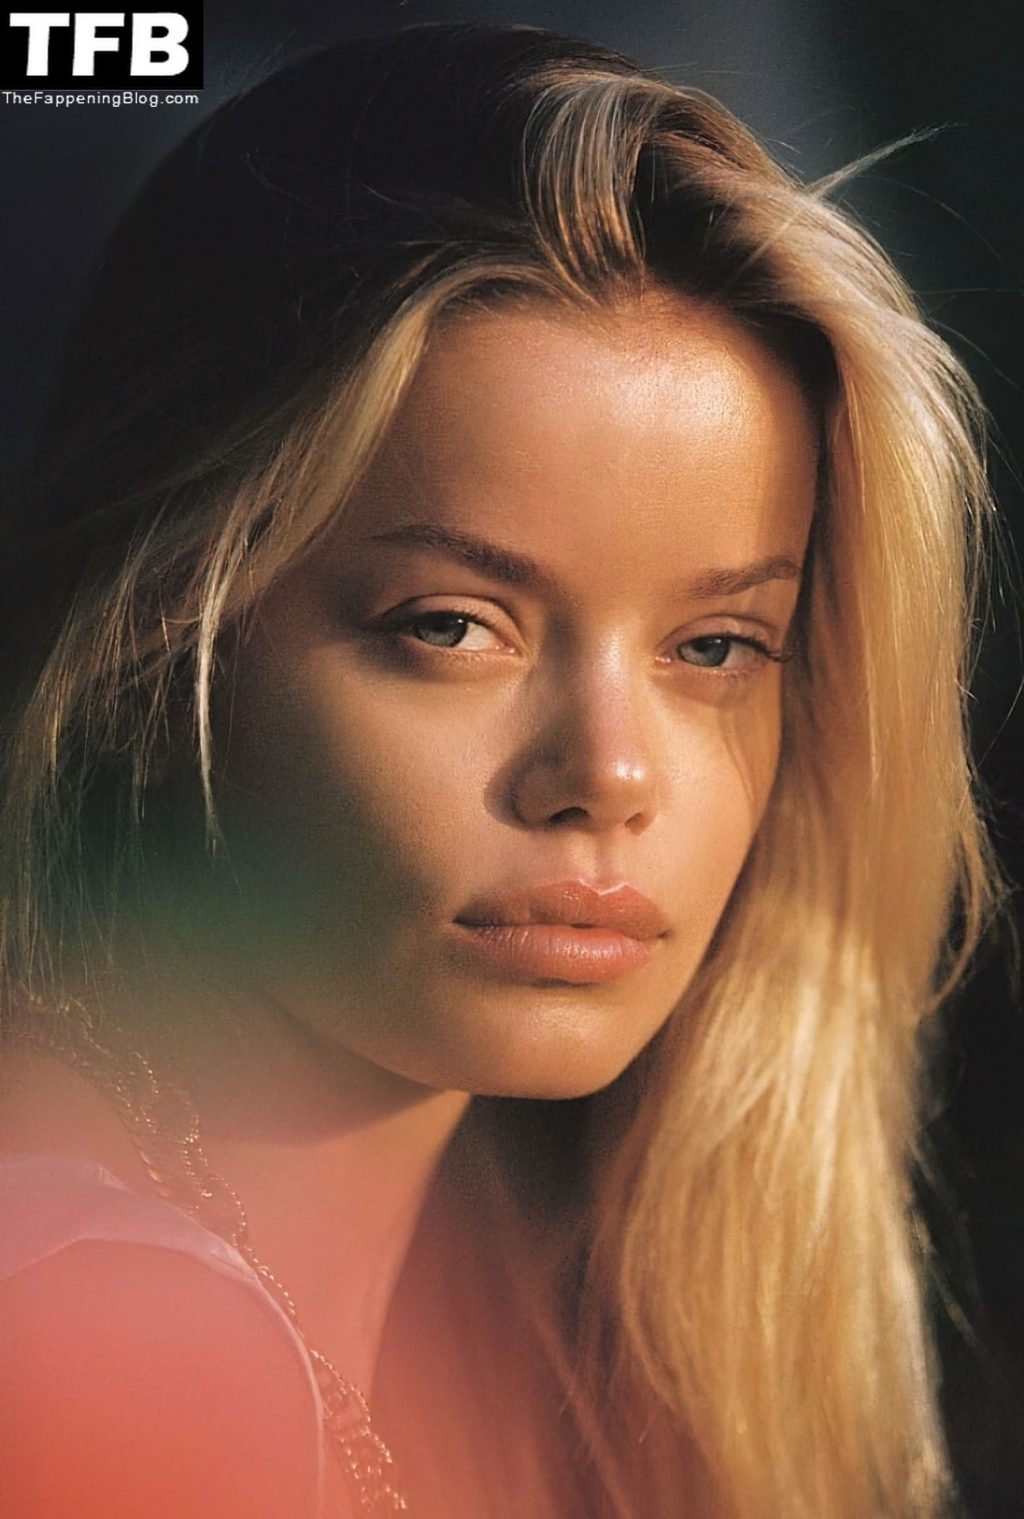 Frida Aasen Displays Her Gorgeous Figure in Skimpy Lingerie for Vanessa Moody 2021 Campaign (31 Photos)